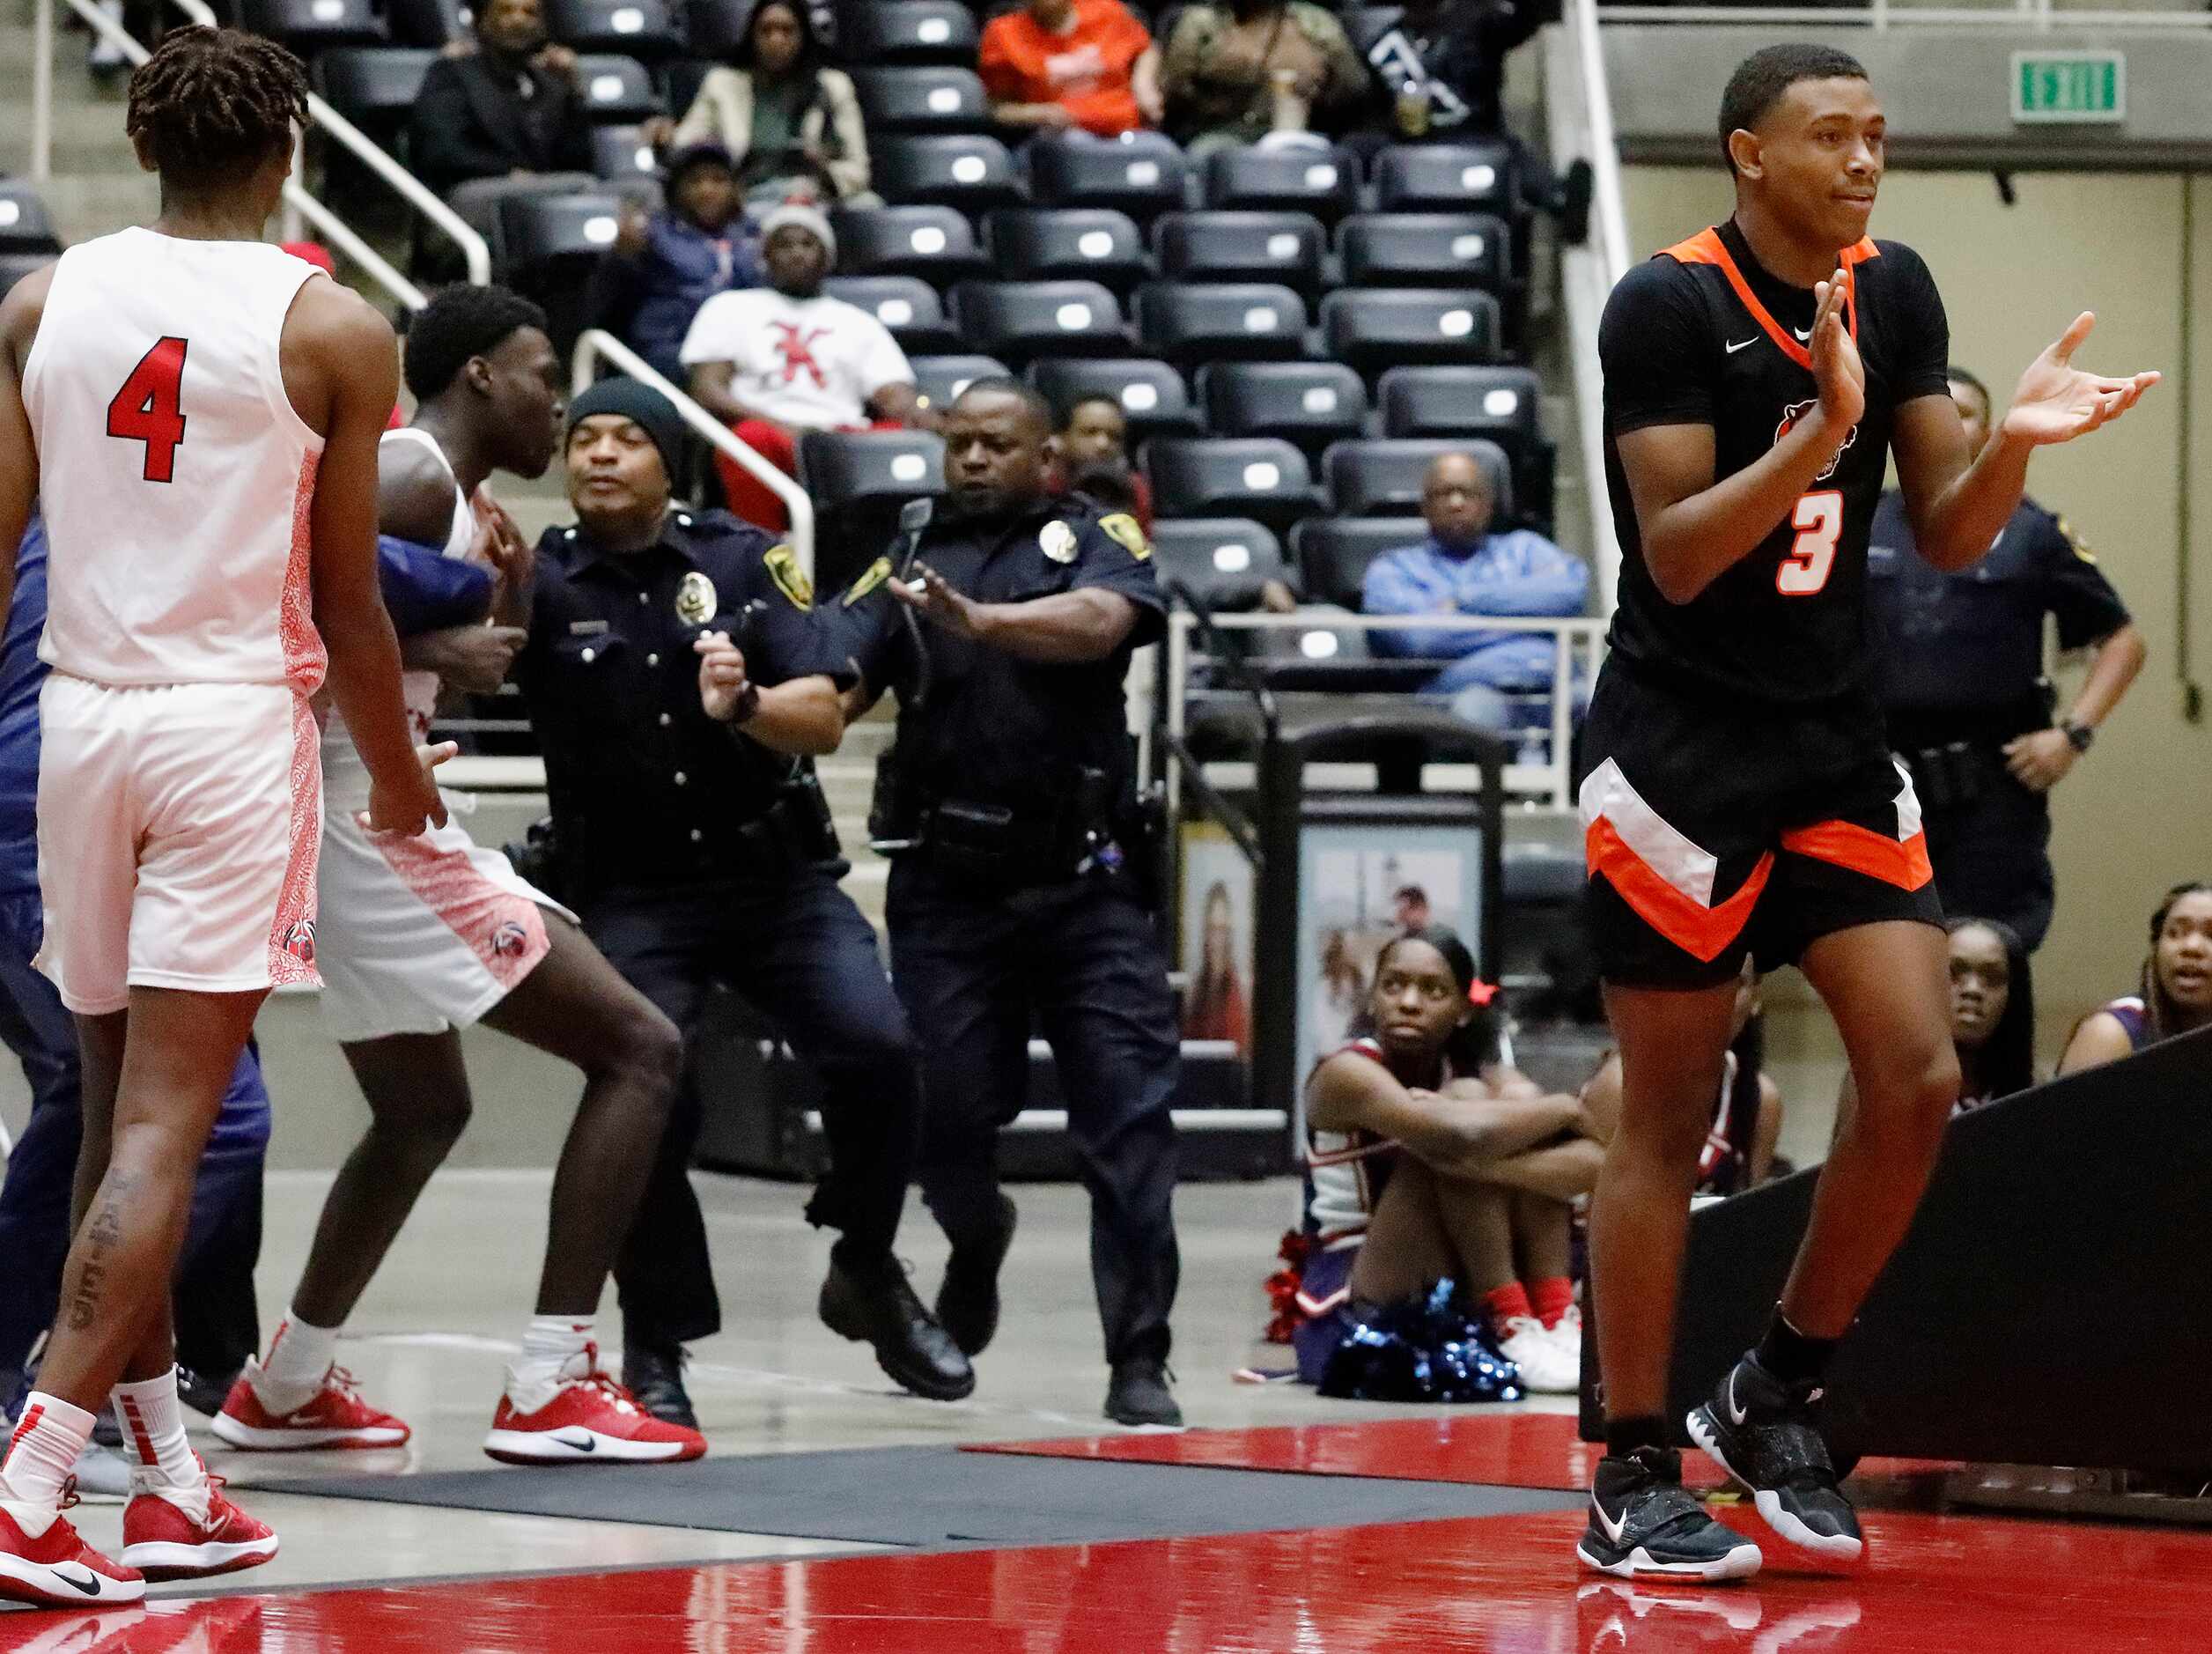 Kimball High School forward Kyron Henderson (15) is restrained by officials and police after...